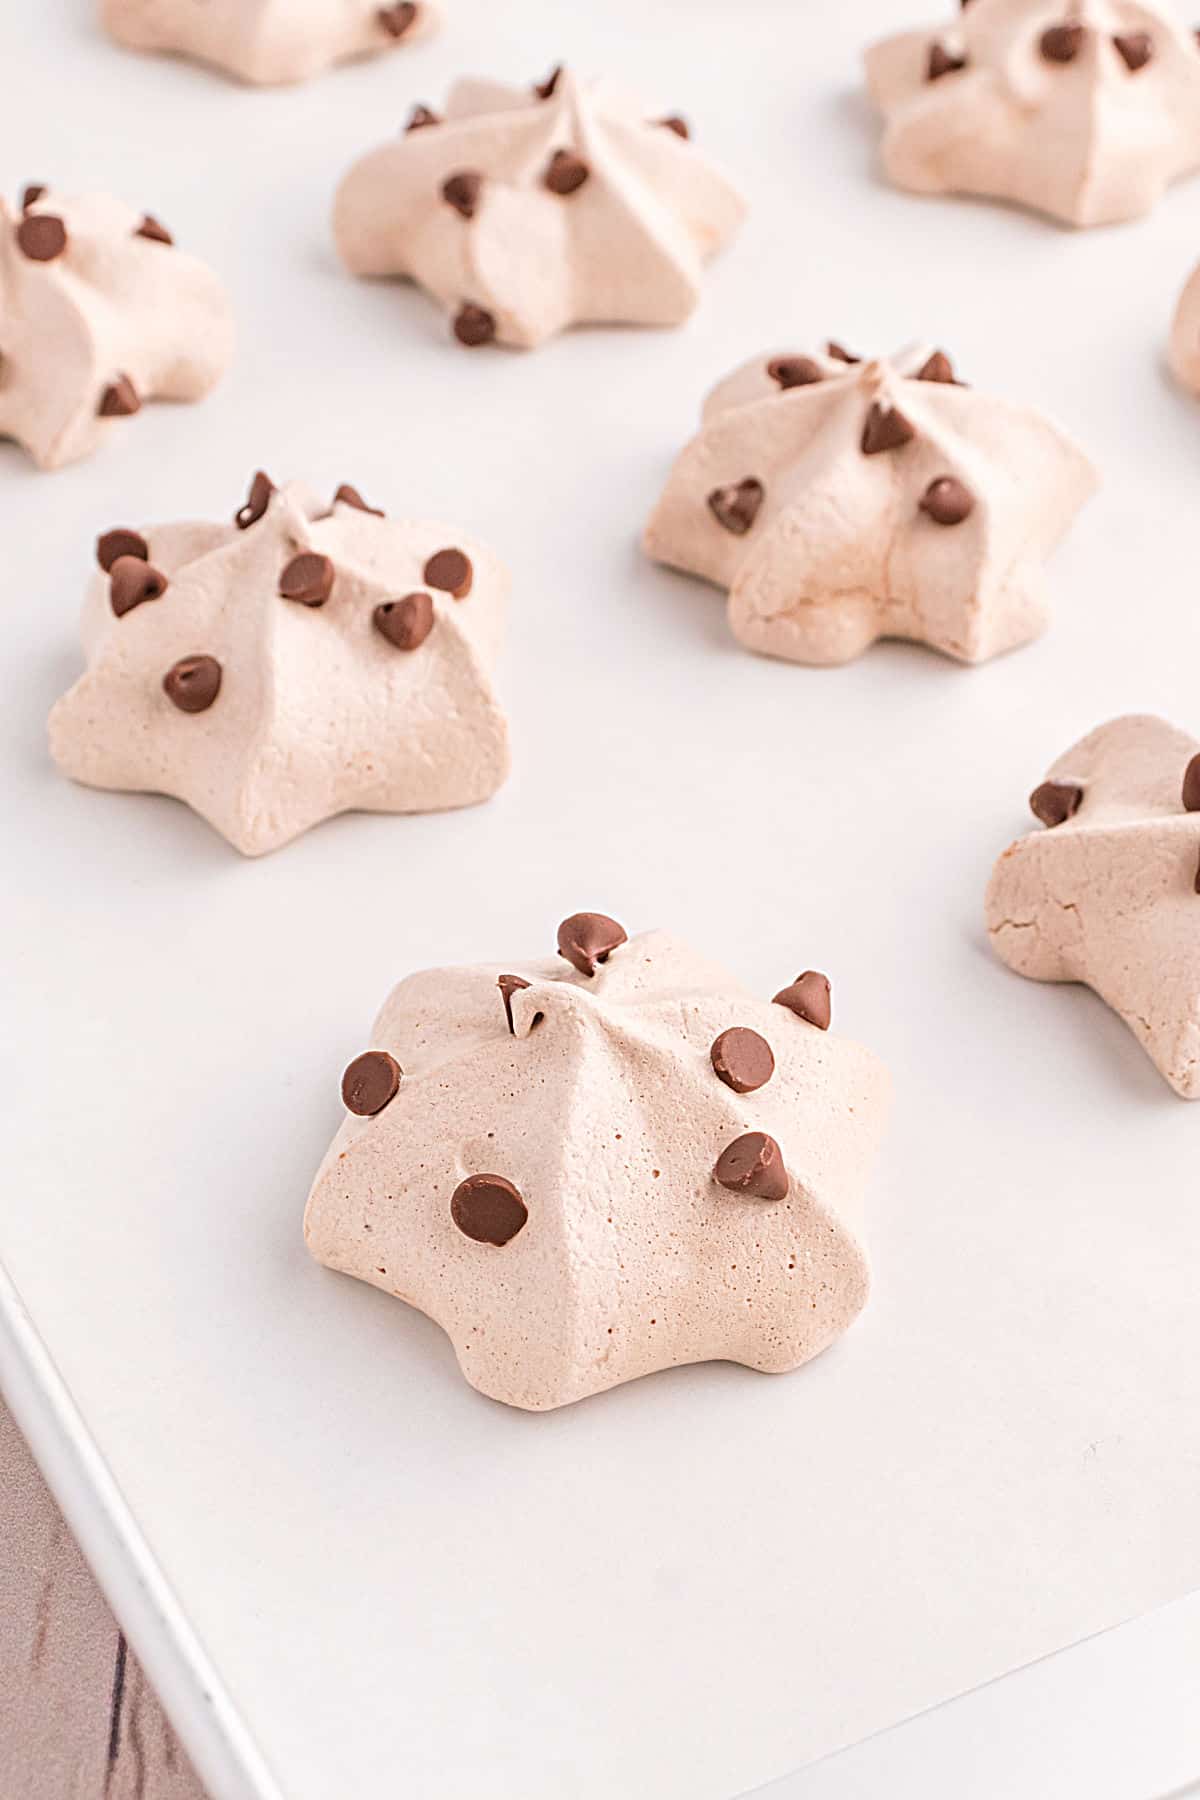 Chocolate chocolate chip meringue cookies on parchment paper.